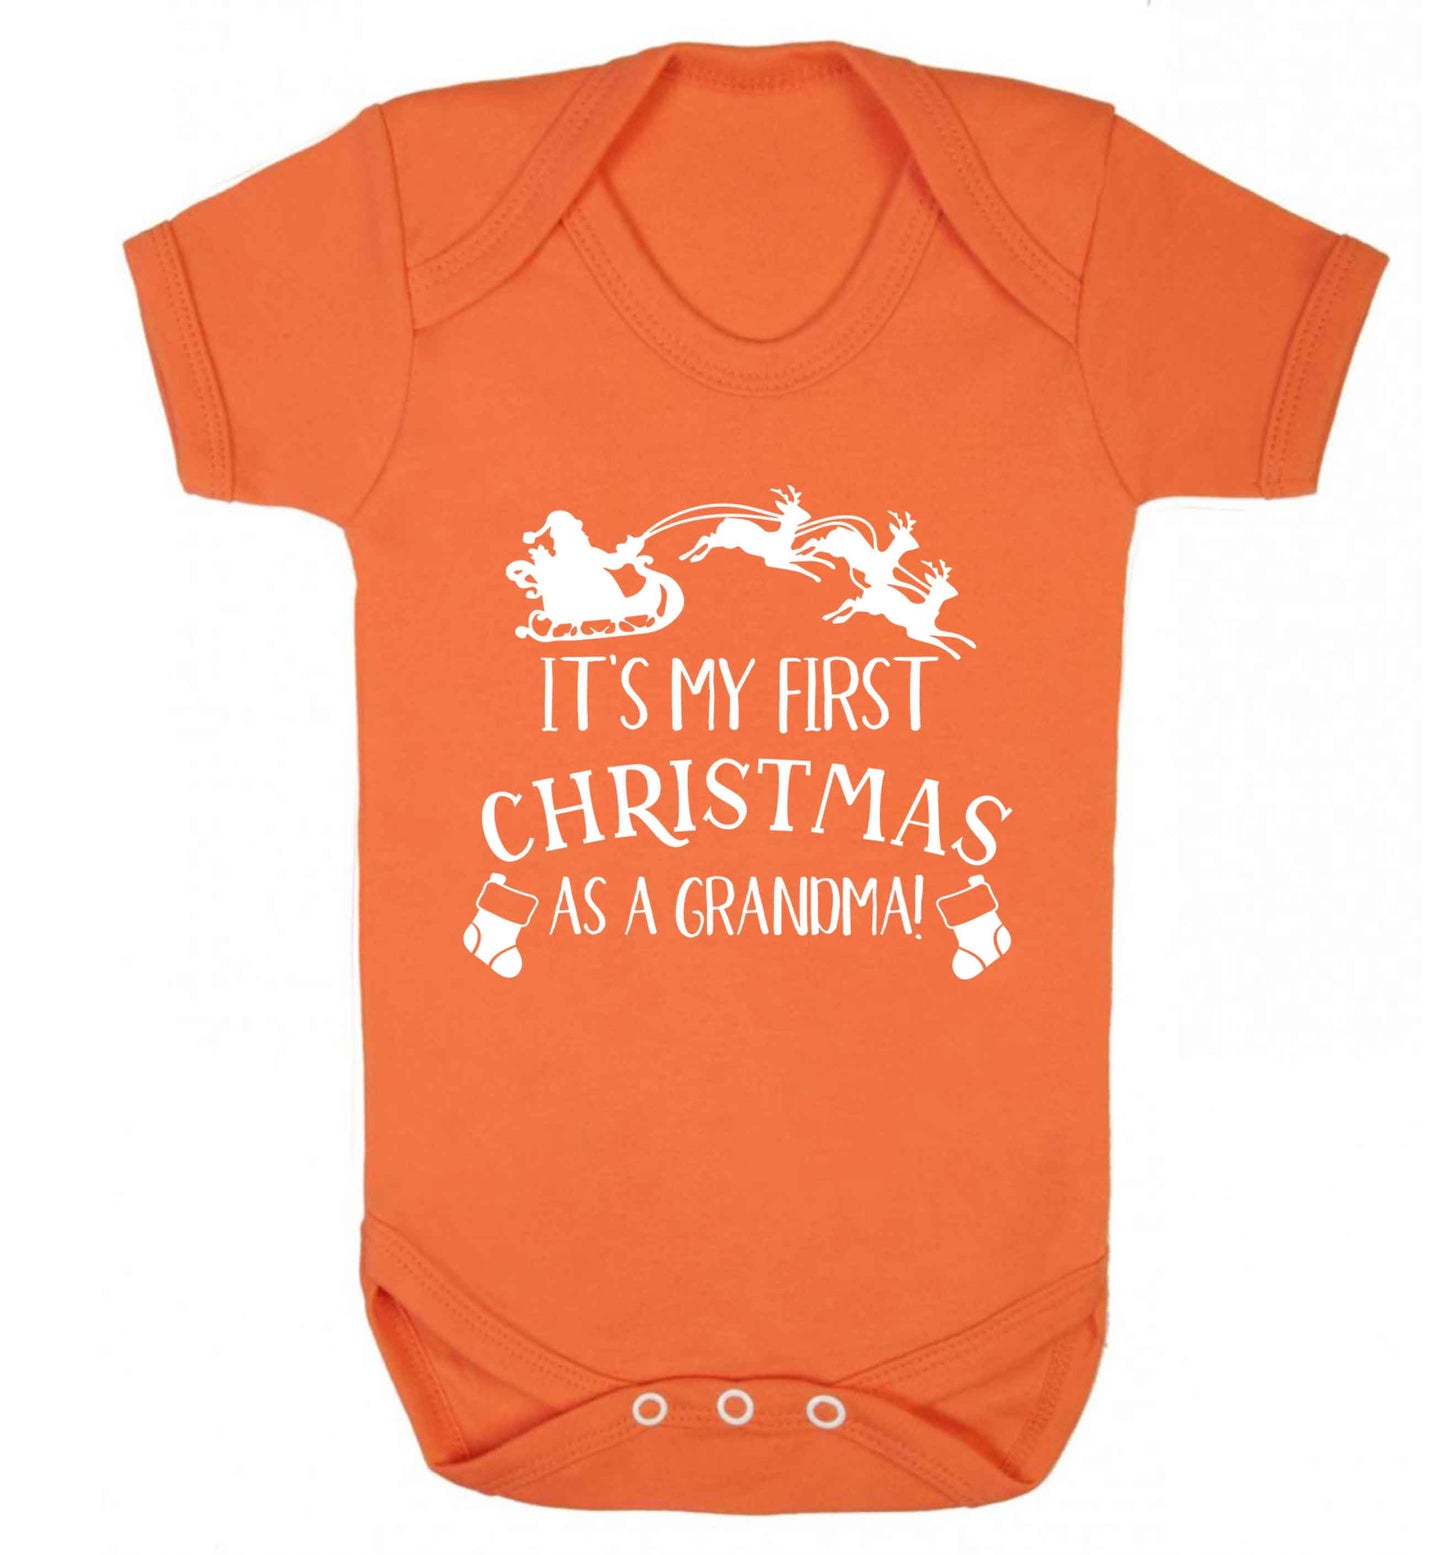 It's my first Christmas as a grandma! Baby Vest orange 18-24 months